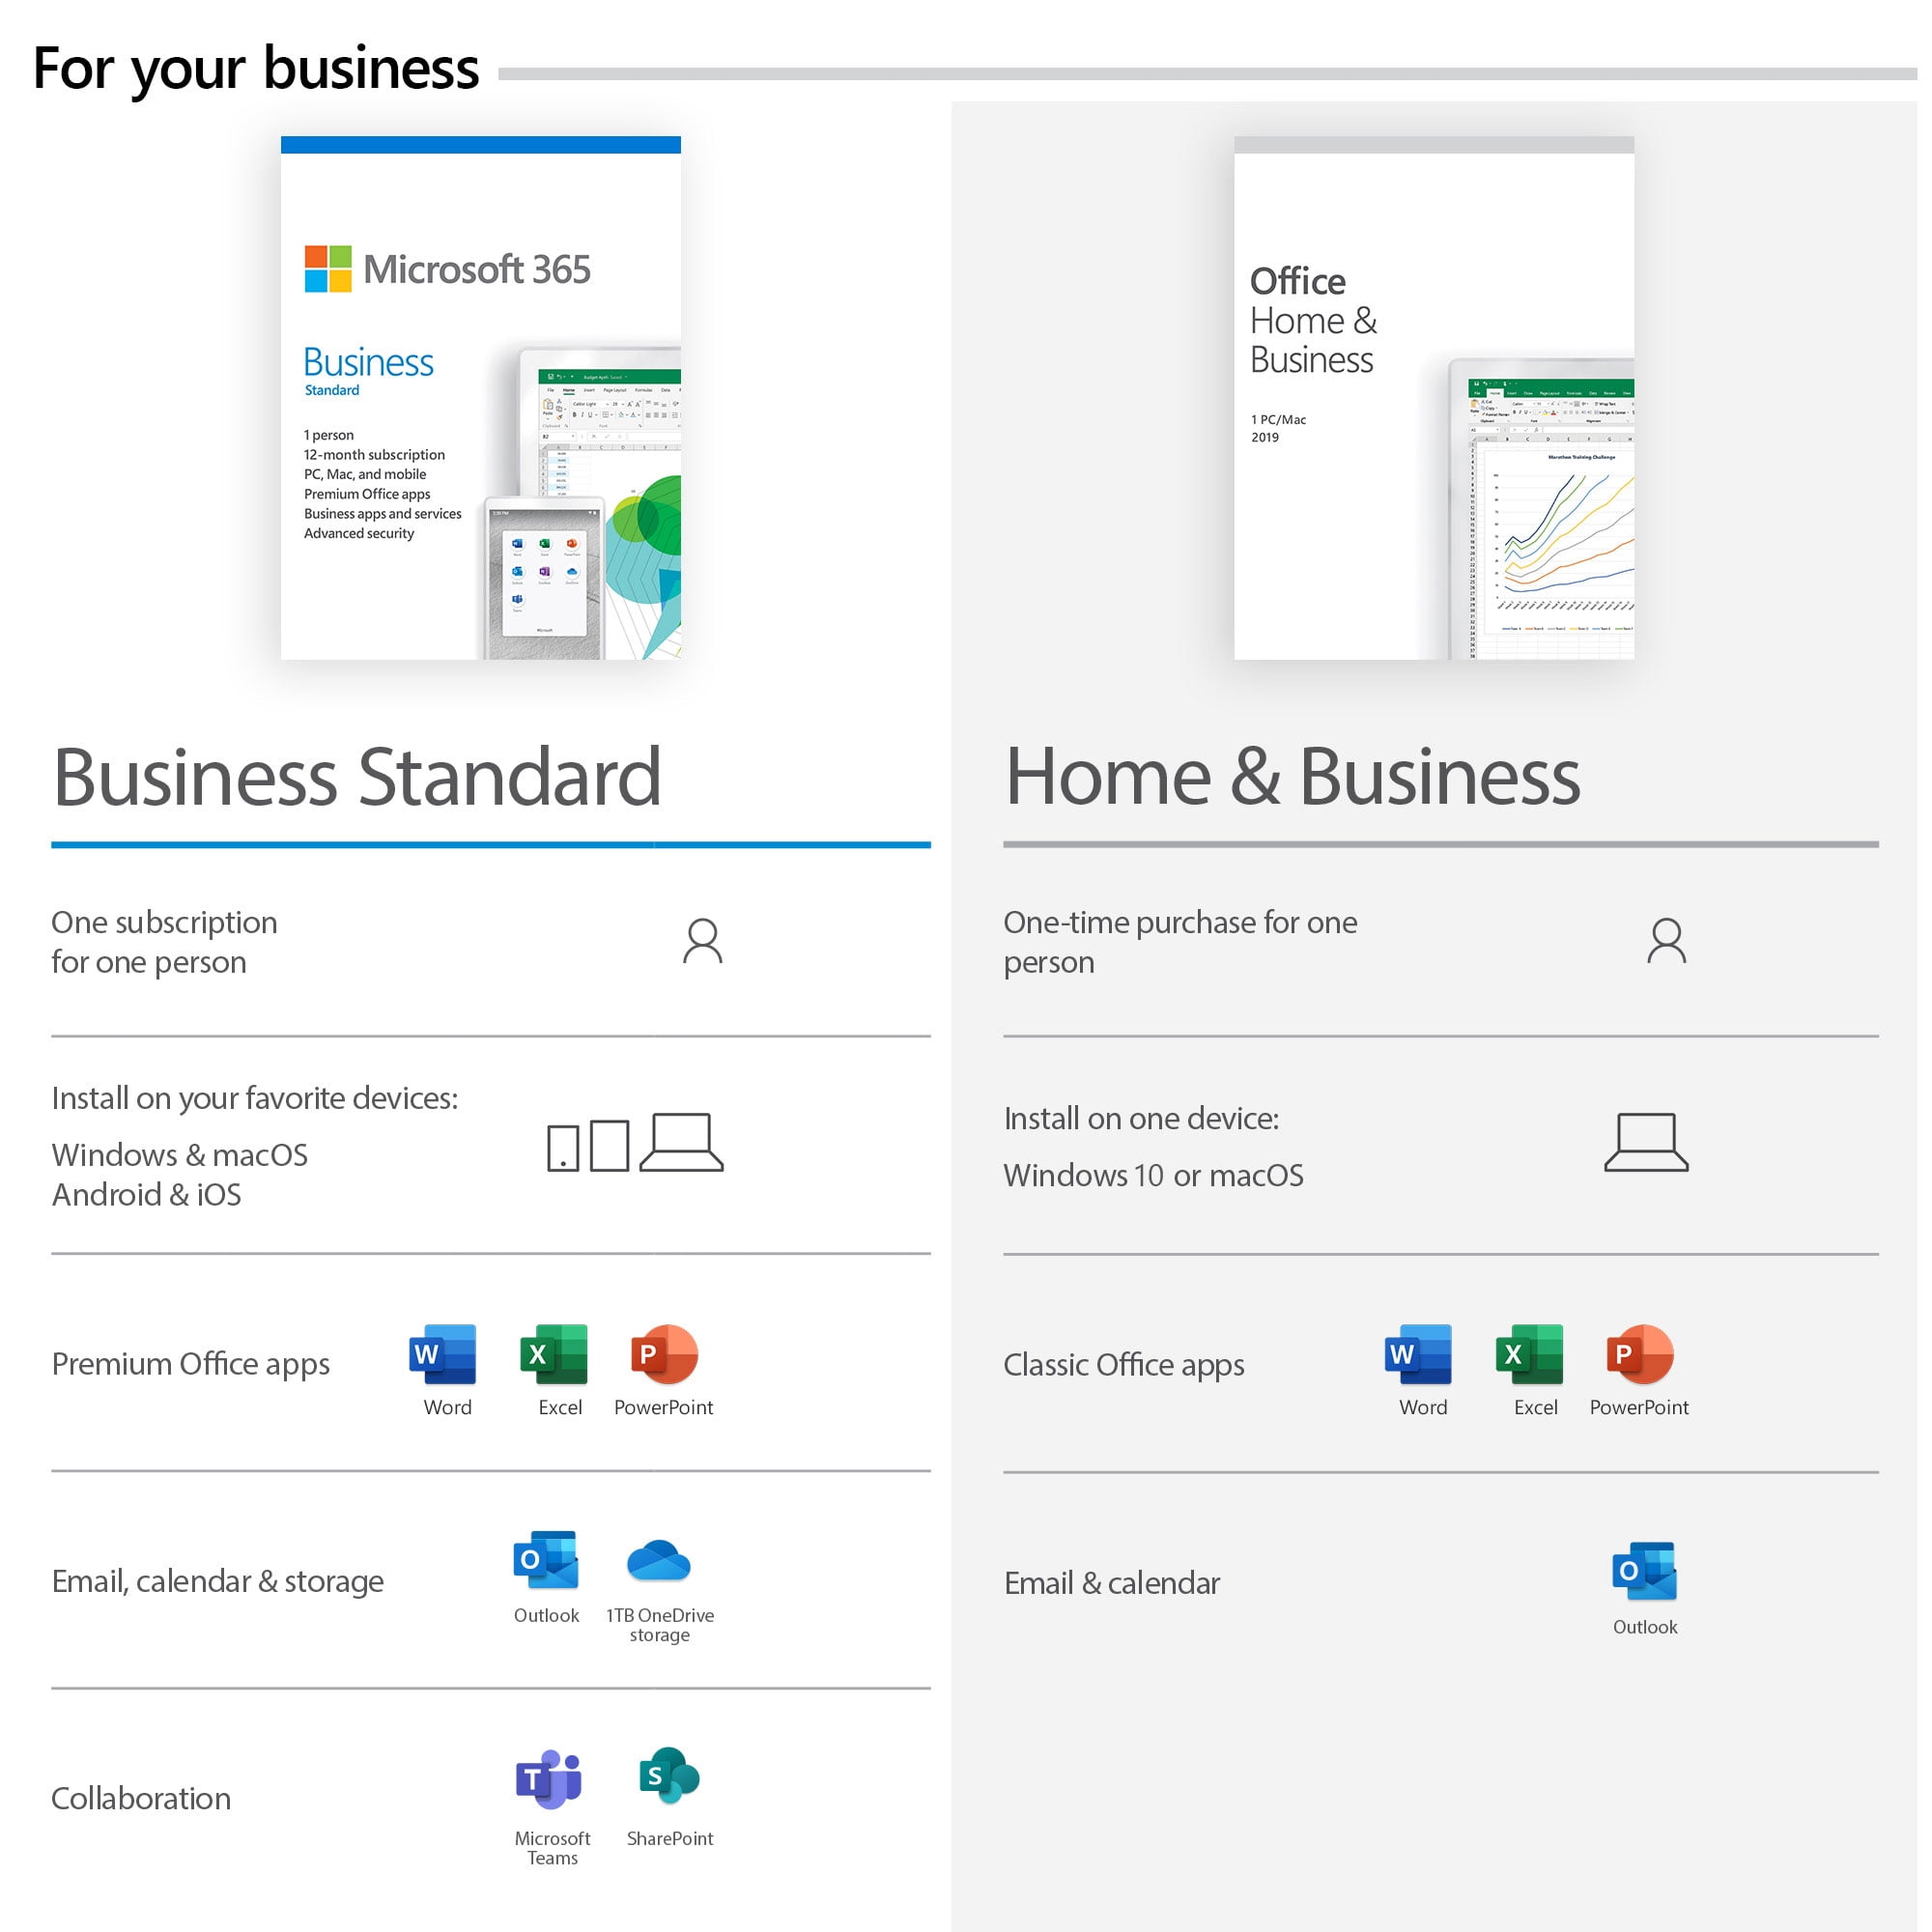 Microsoft Office Home & Business 2019 | One-time purchase, 1 